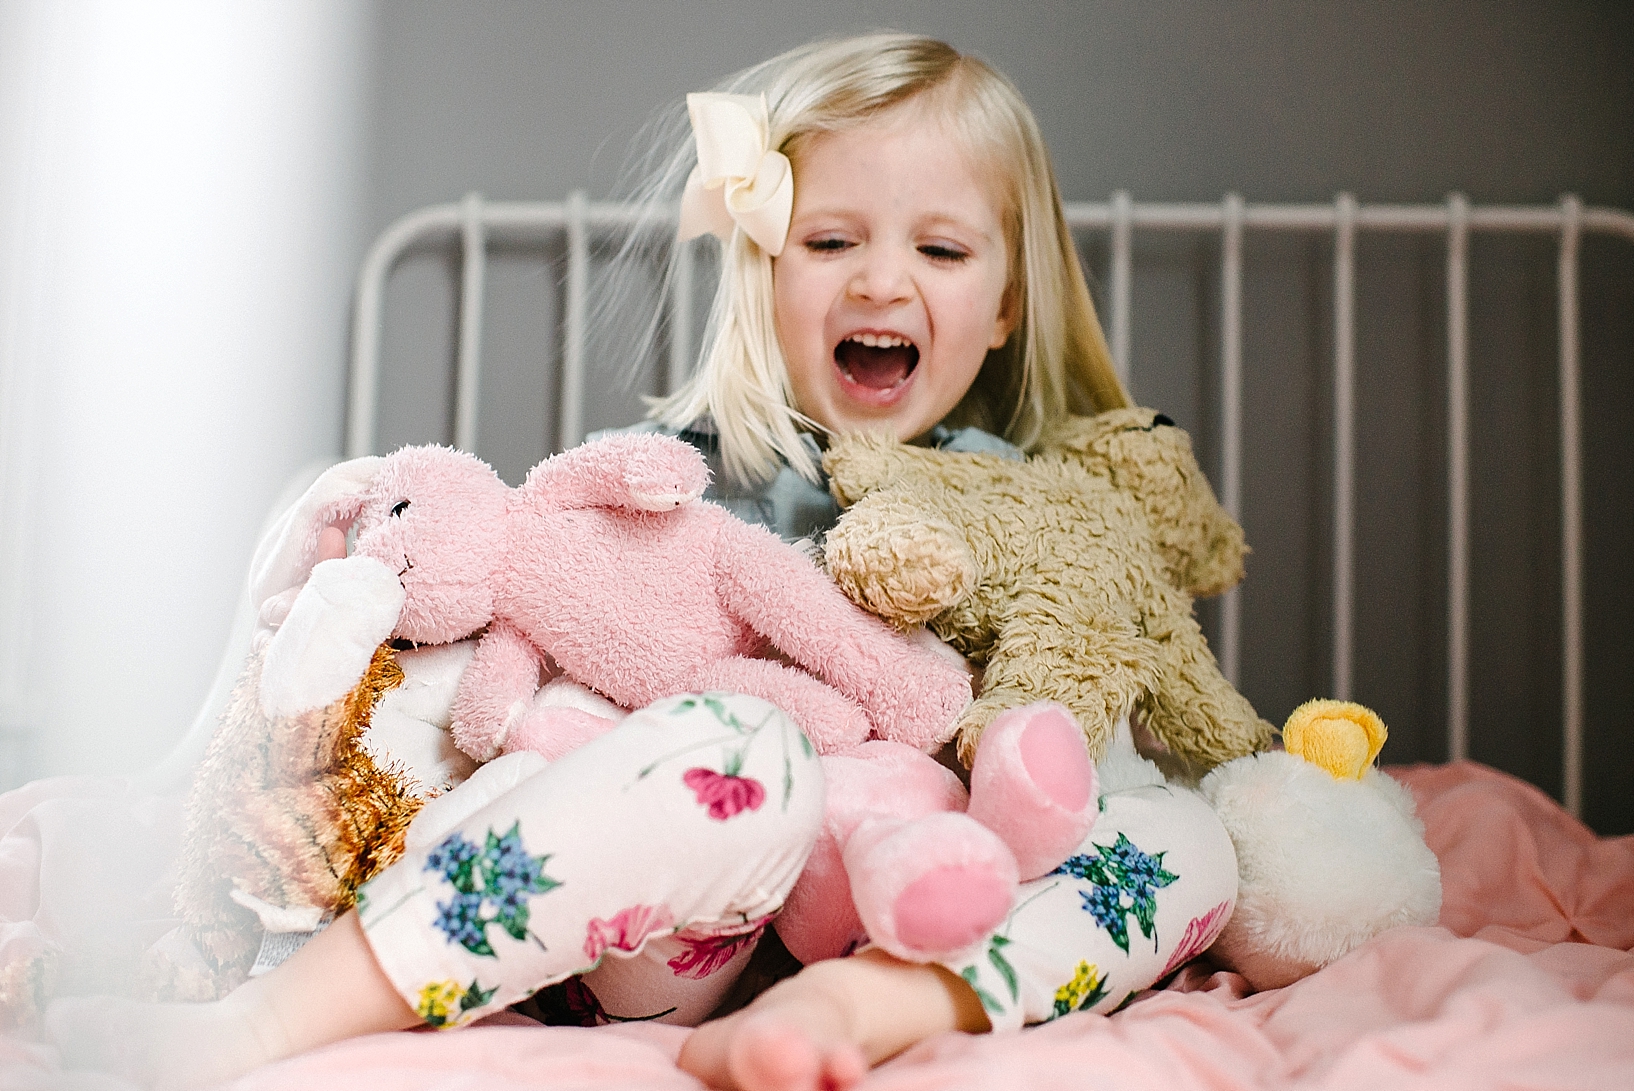 blonde toddler girl wearing floral leggings sitting on white wrought iron bed with stuffed animals in her lap